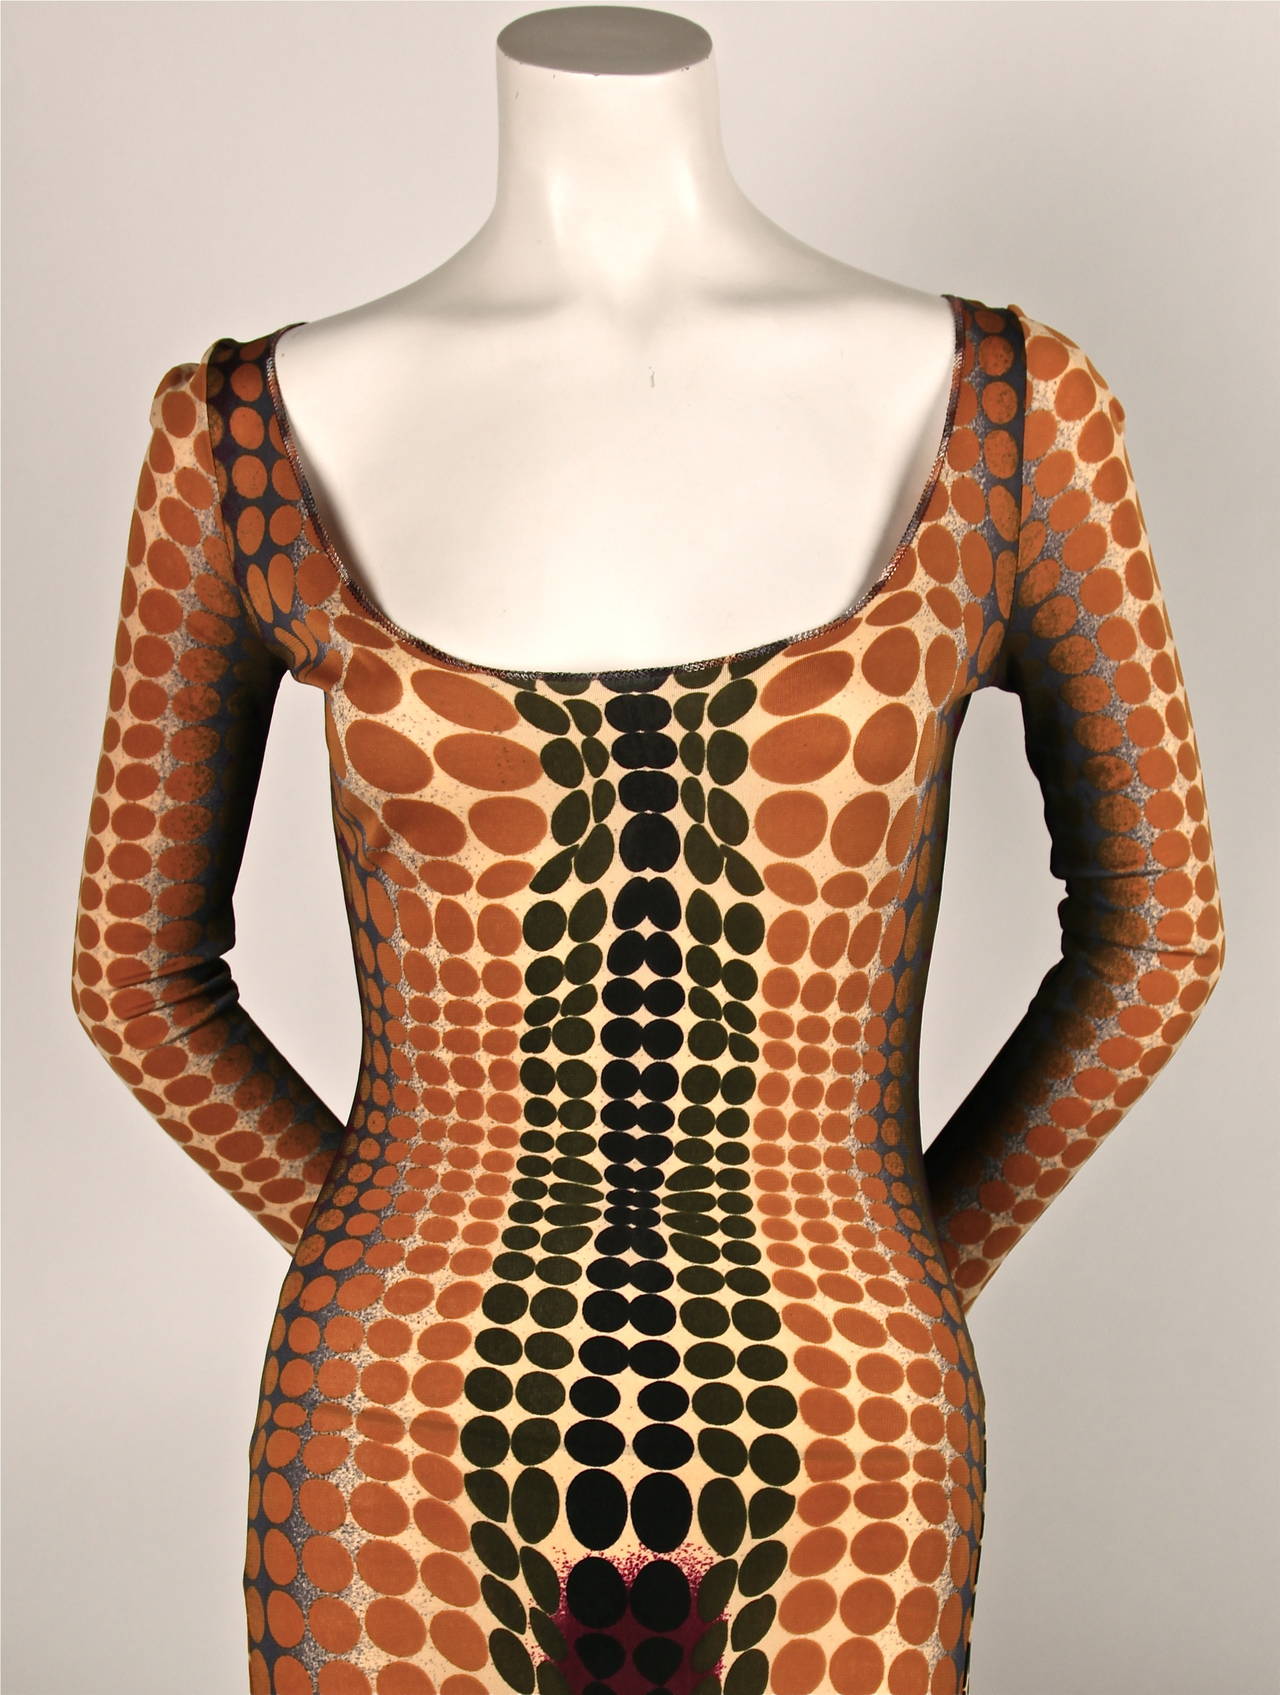 Very rare graphic op-art cyber print dress by Jean Paul Gaultier dating to the 